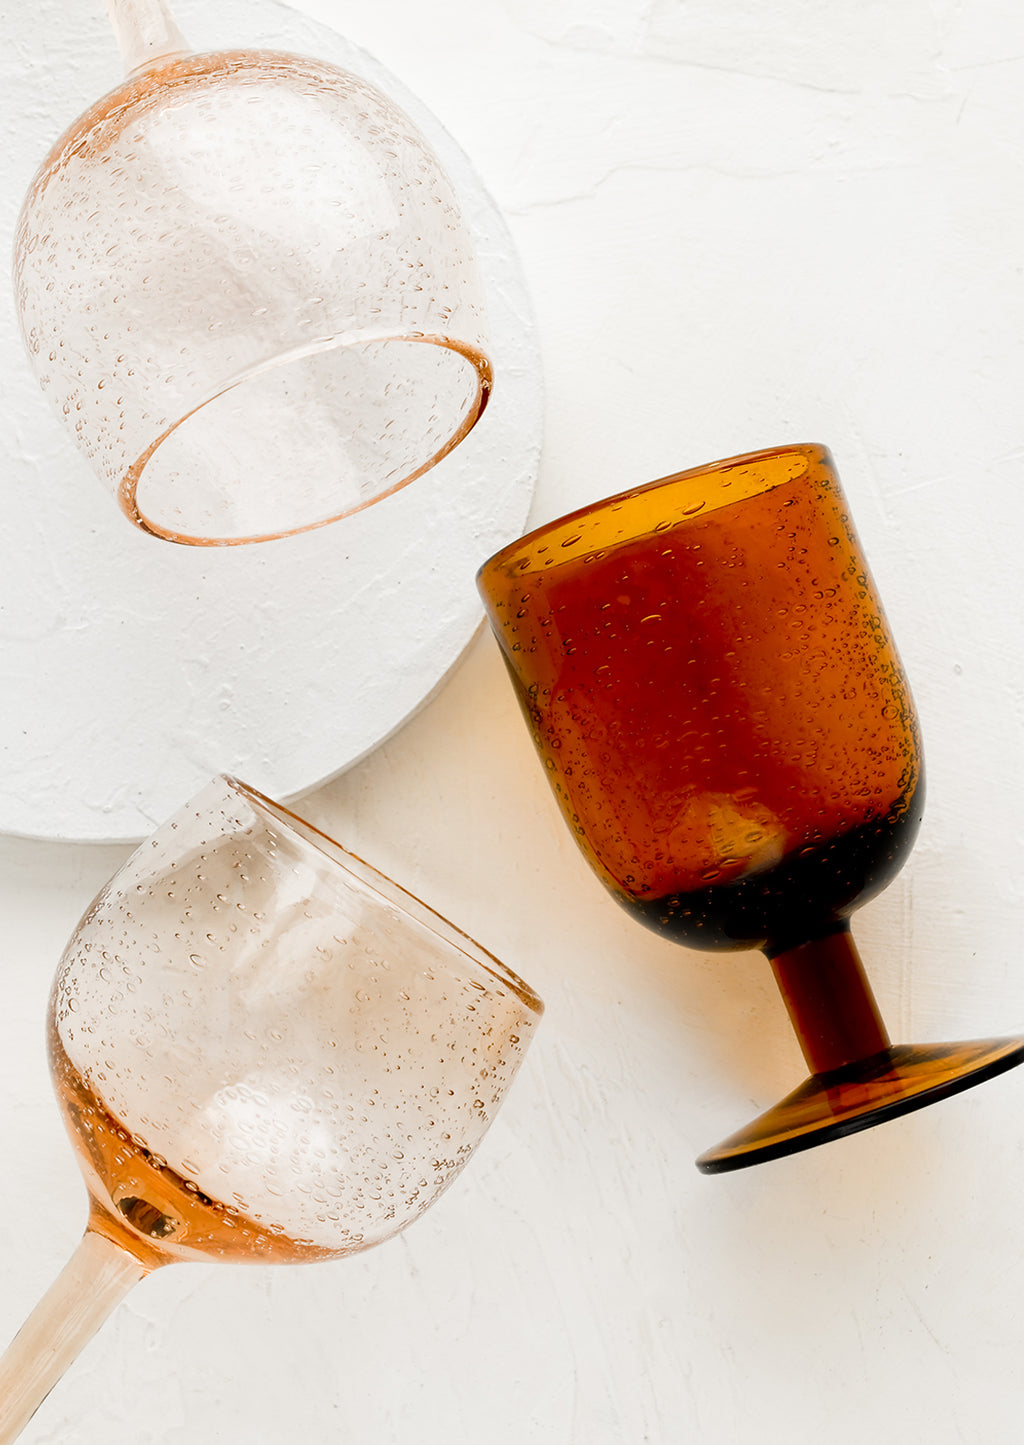 1: Rose and amber colored stemware glasses.